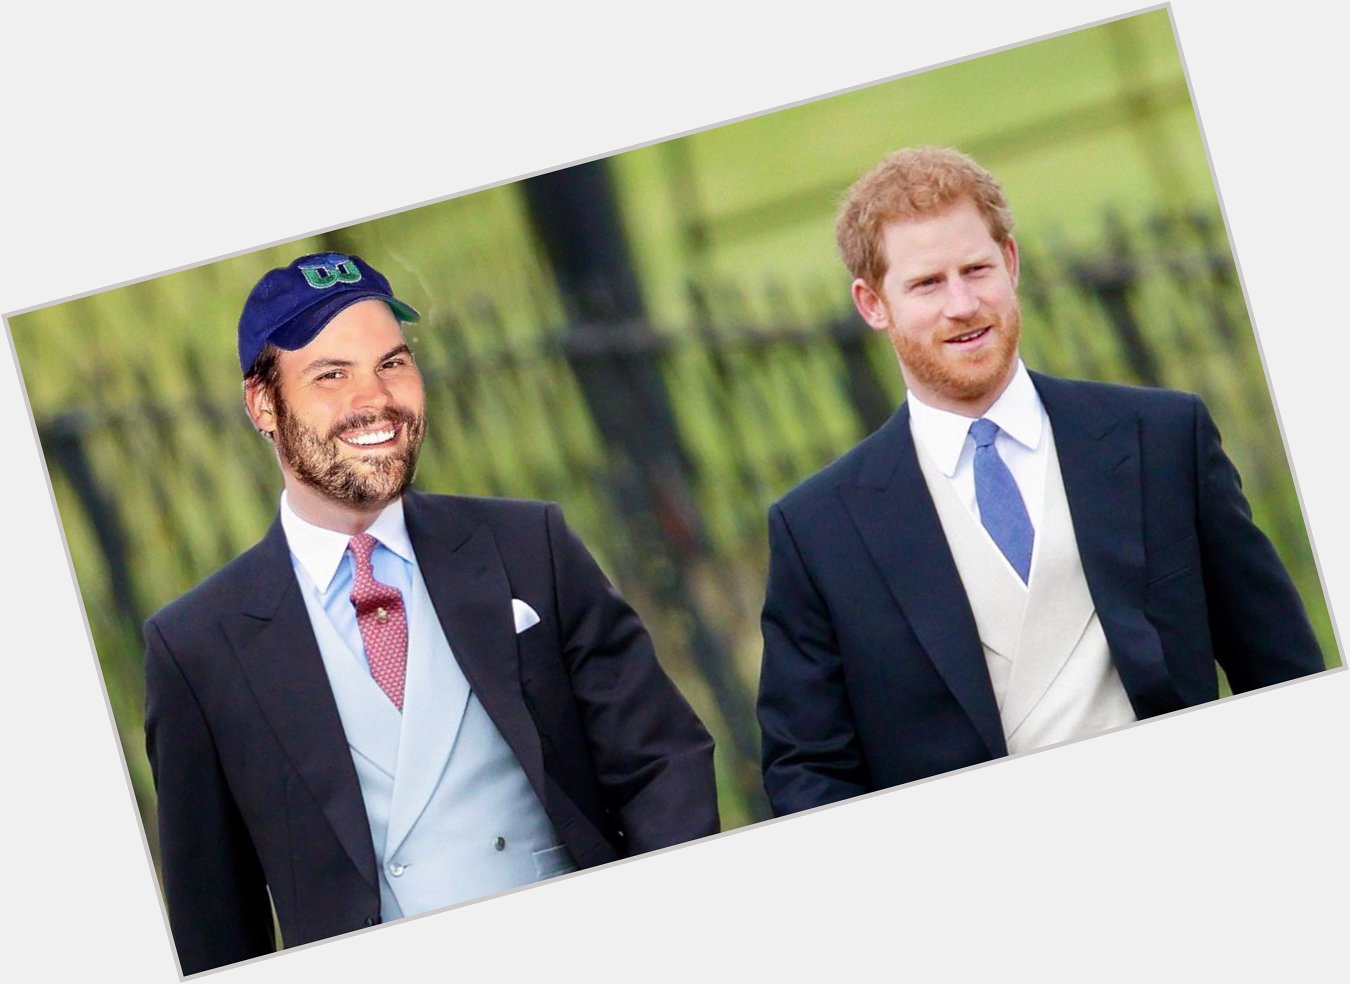 One looks dead sexy with a beard and is adored by the ladies. The other is Prince Harry. Happy birthday to both!! 